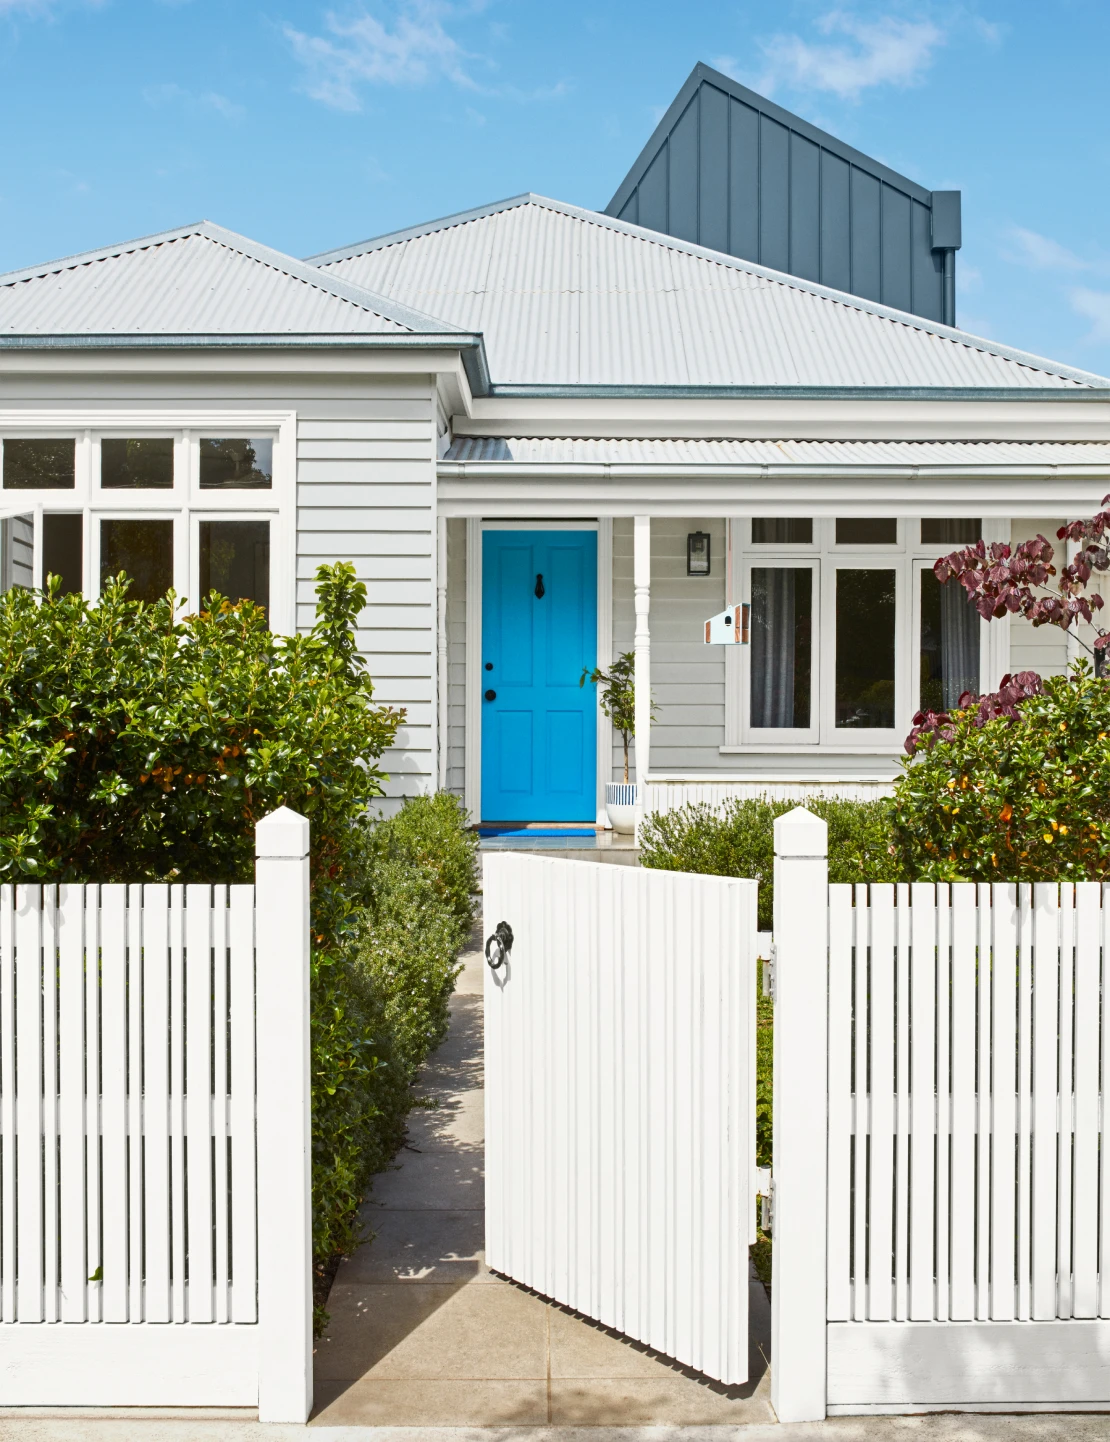 House exterior with blue front door and white fence